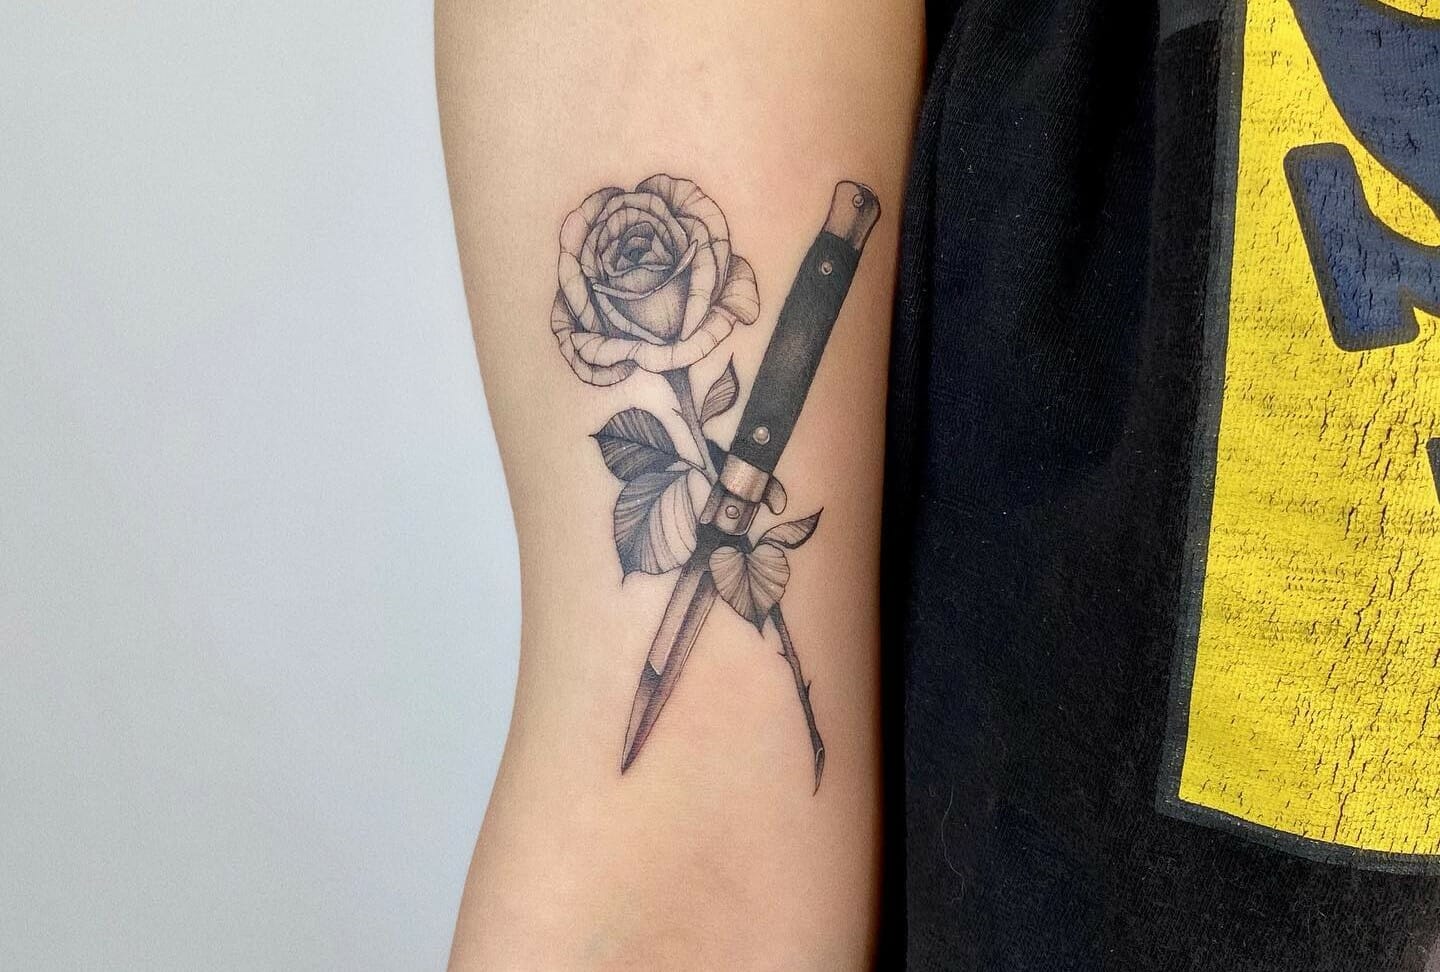 101 Best Rose Knife Tattoo Ideas That Will Blow Your Mind! - Outsons